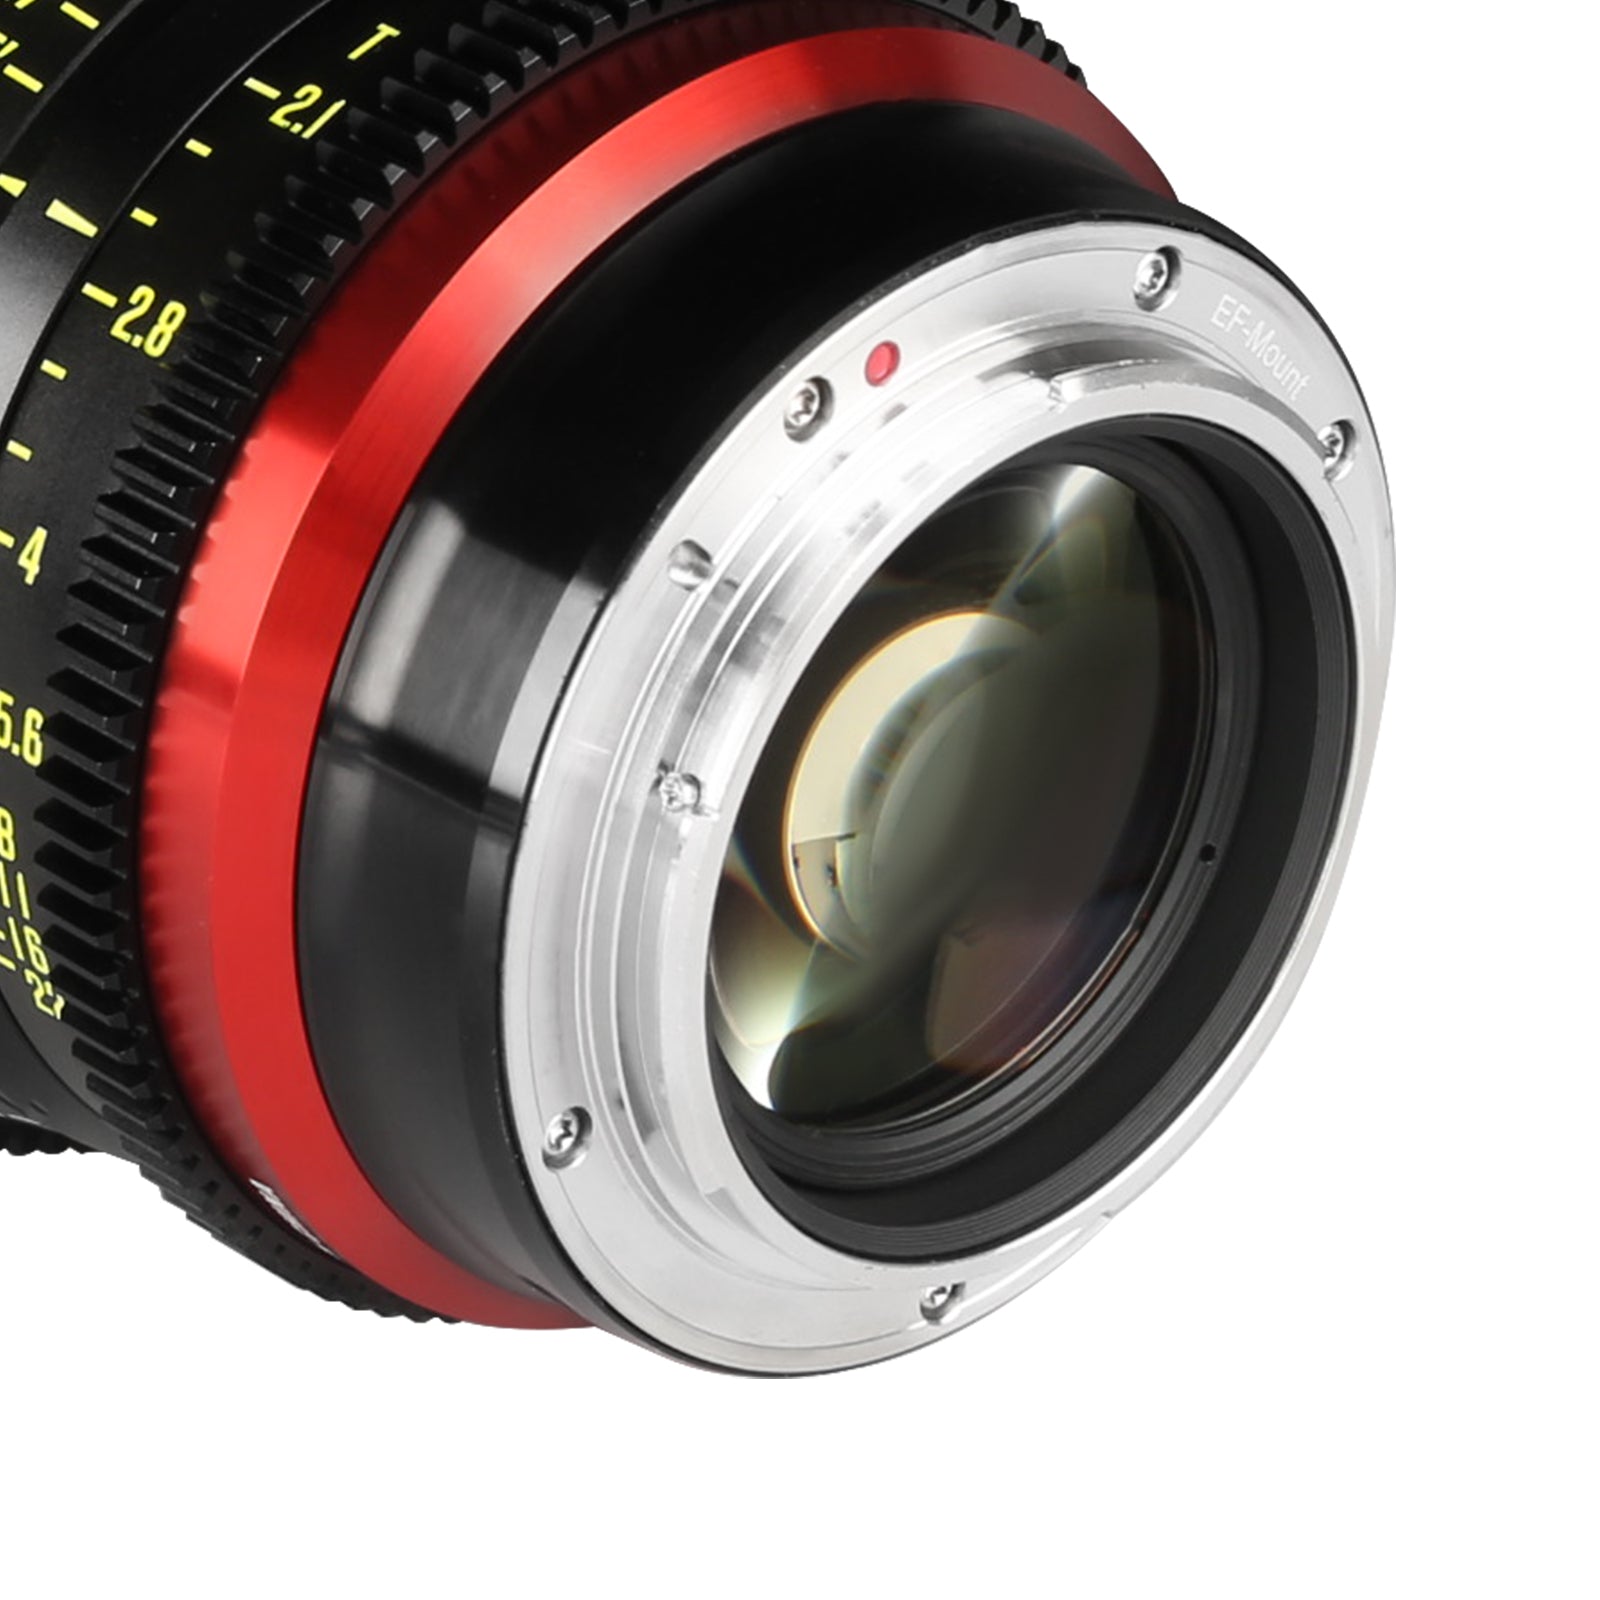 Meike Cinema Full Frame Cinema Prime 85mm T2.1 Lens (Canon EF Mount in a Close-Up View)